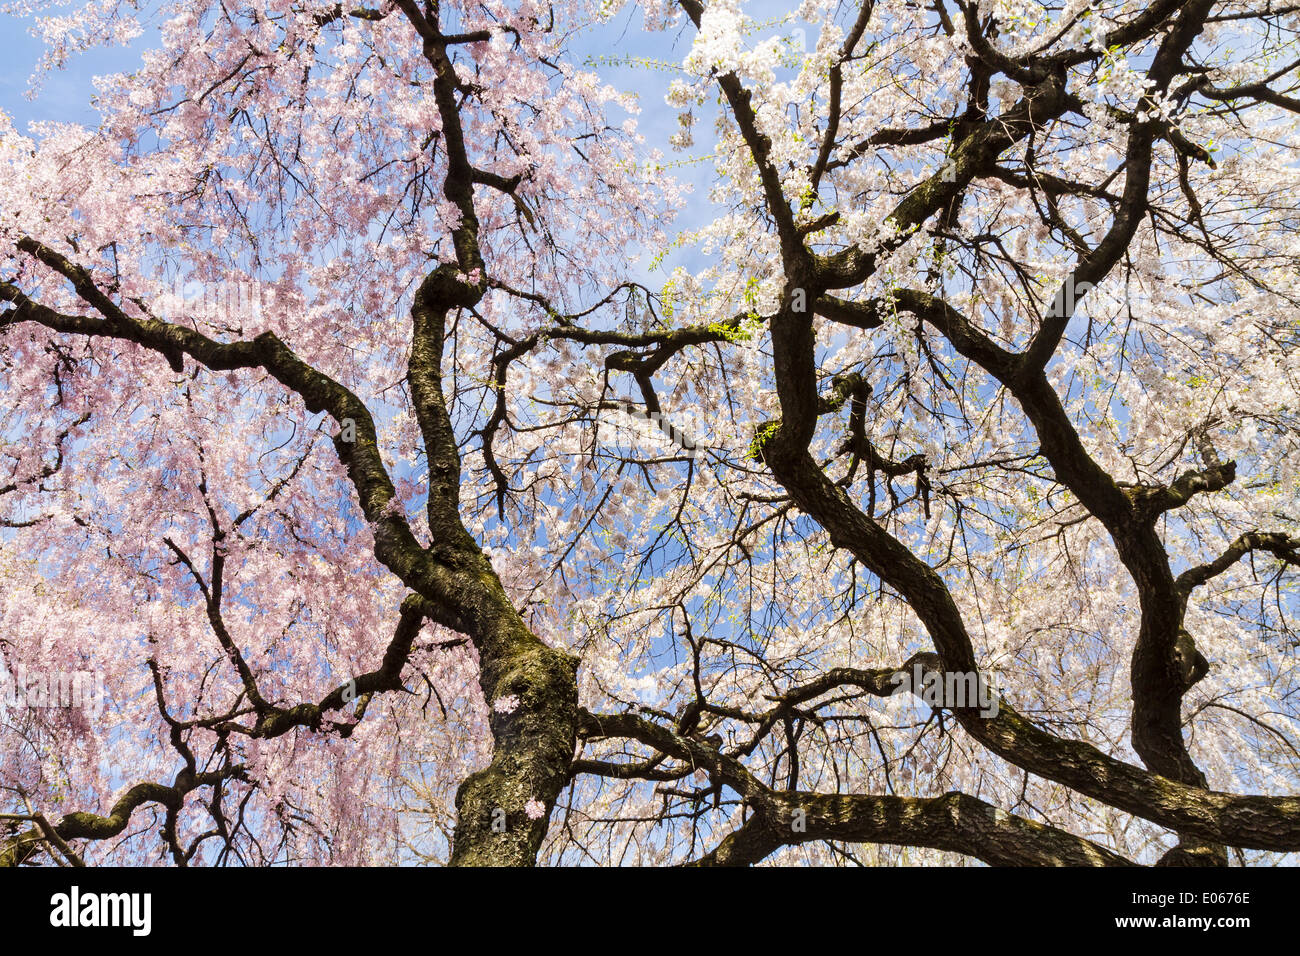 Cherry tree branches silhouetted against the sky and a canopy of white and pink blossoms in the Brooklyn Botanic Gardens Stock Photo